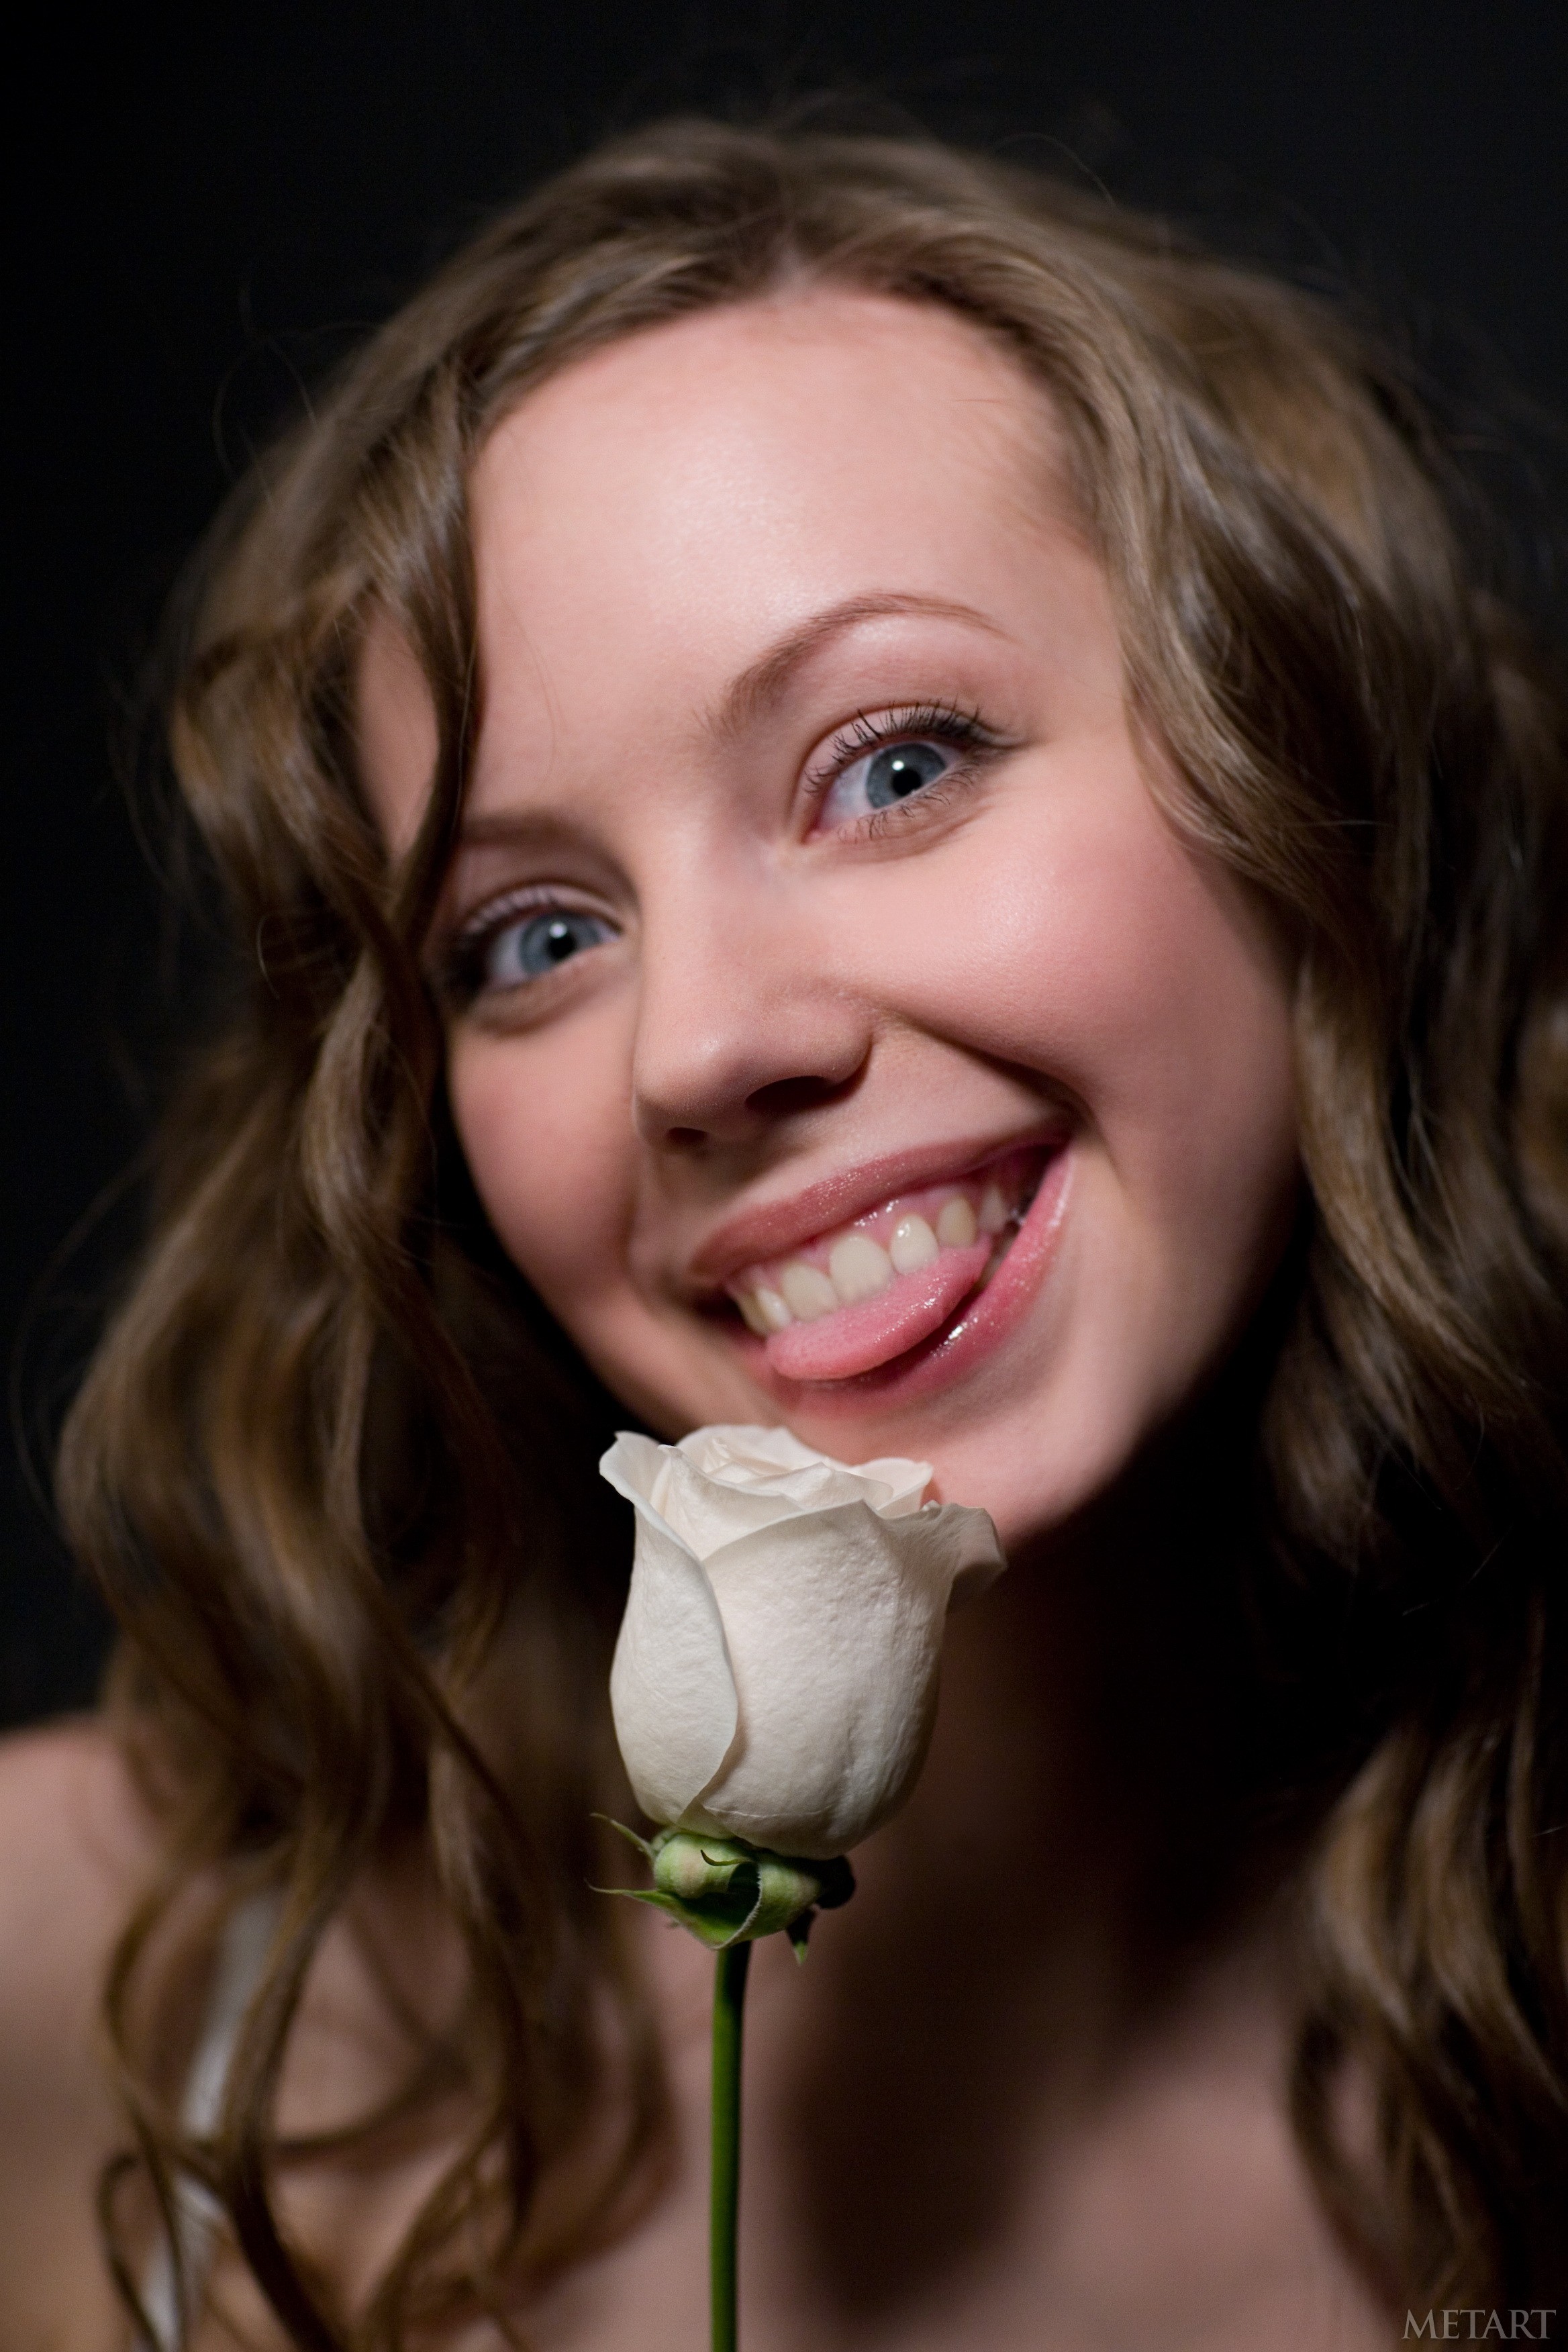 Women Brunette Blue Eyes Smiling Tongues White Flowers Rose Crazy Face 2336x3504